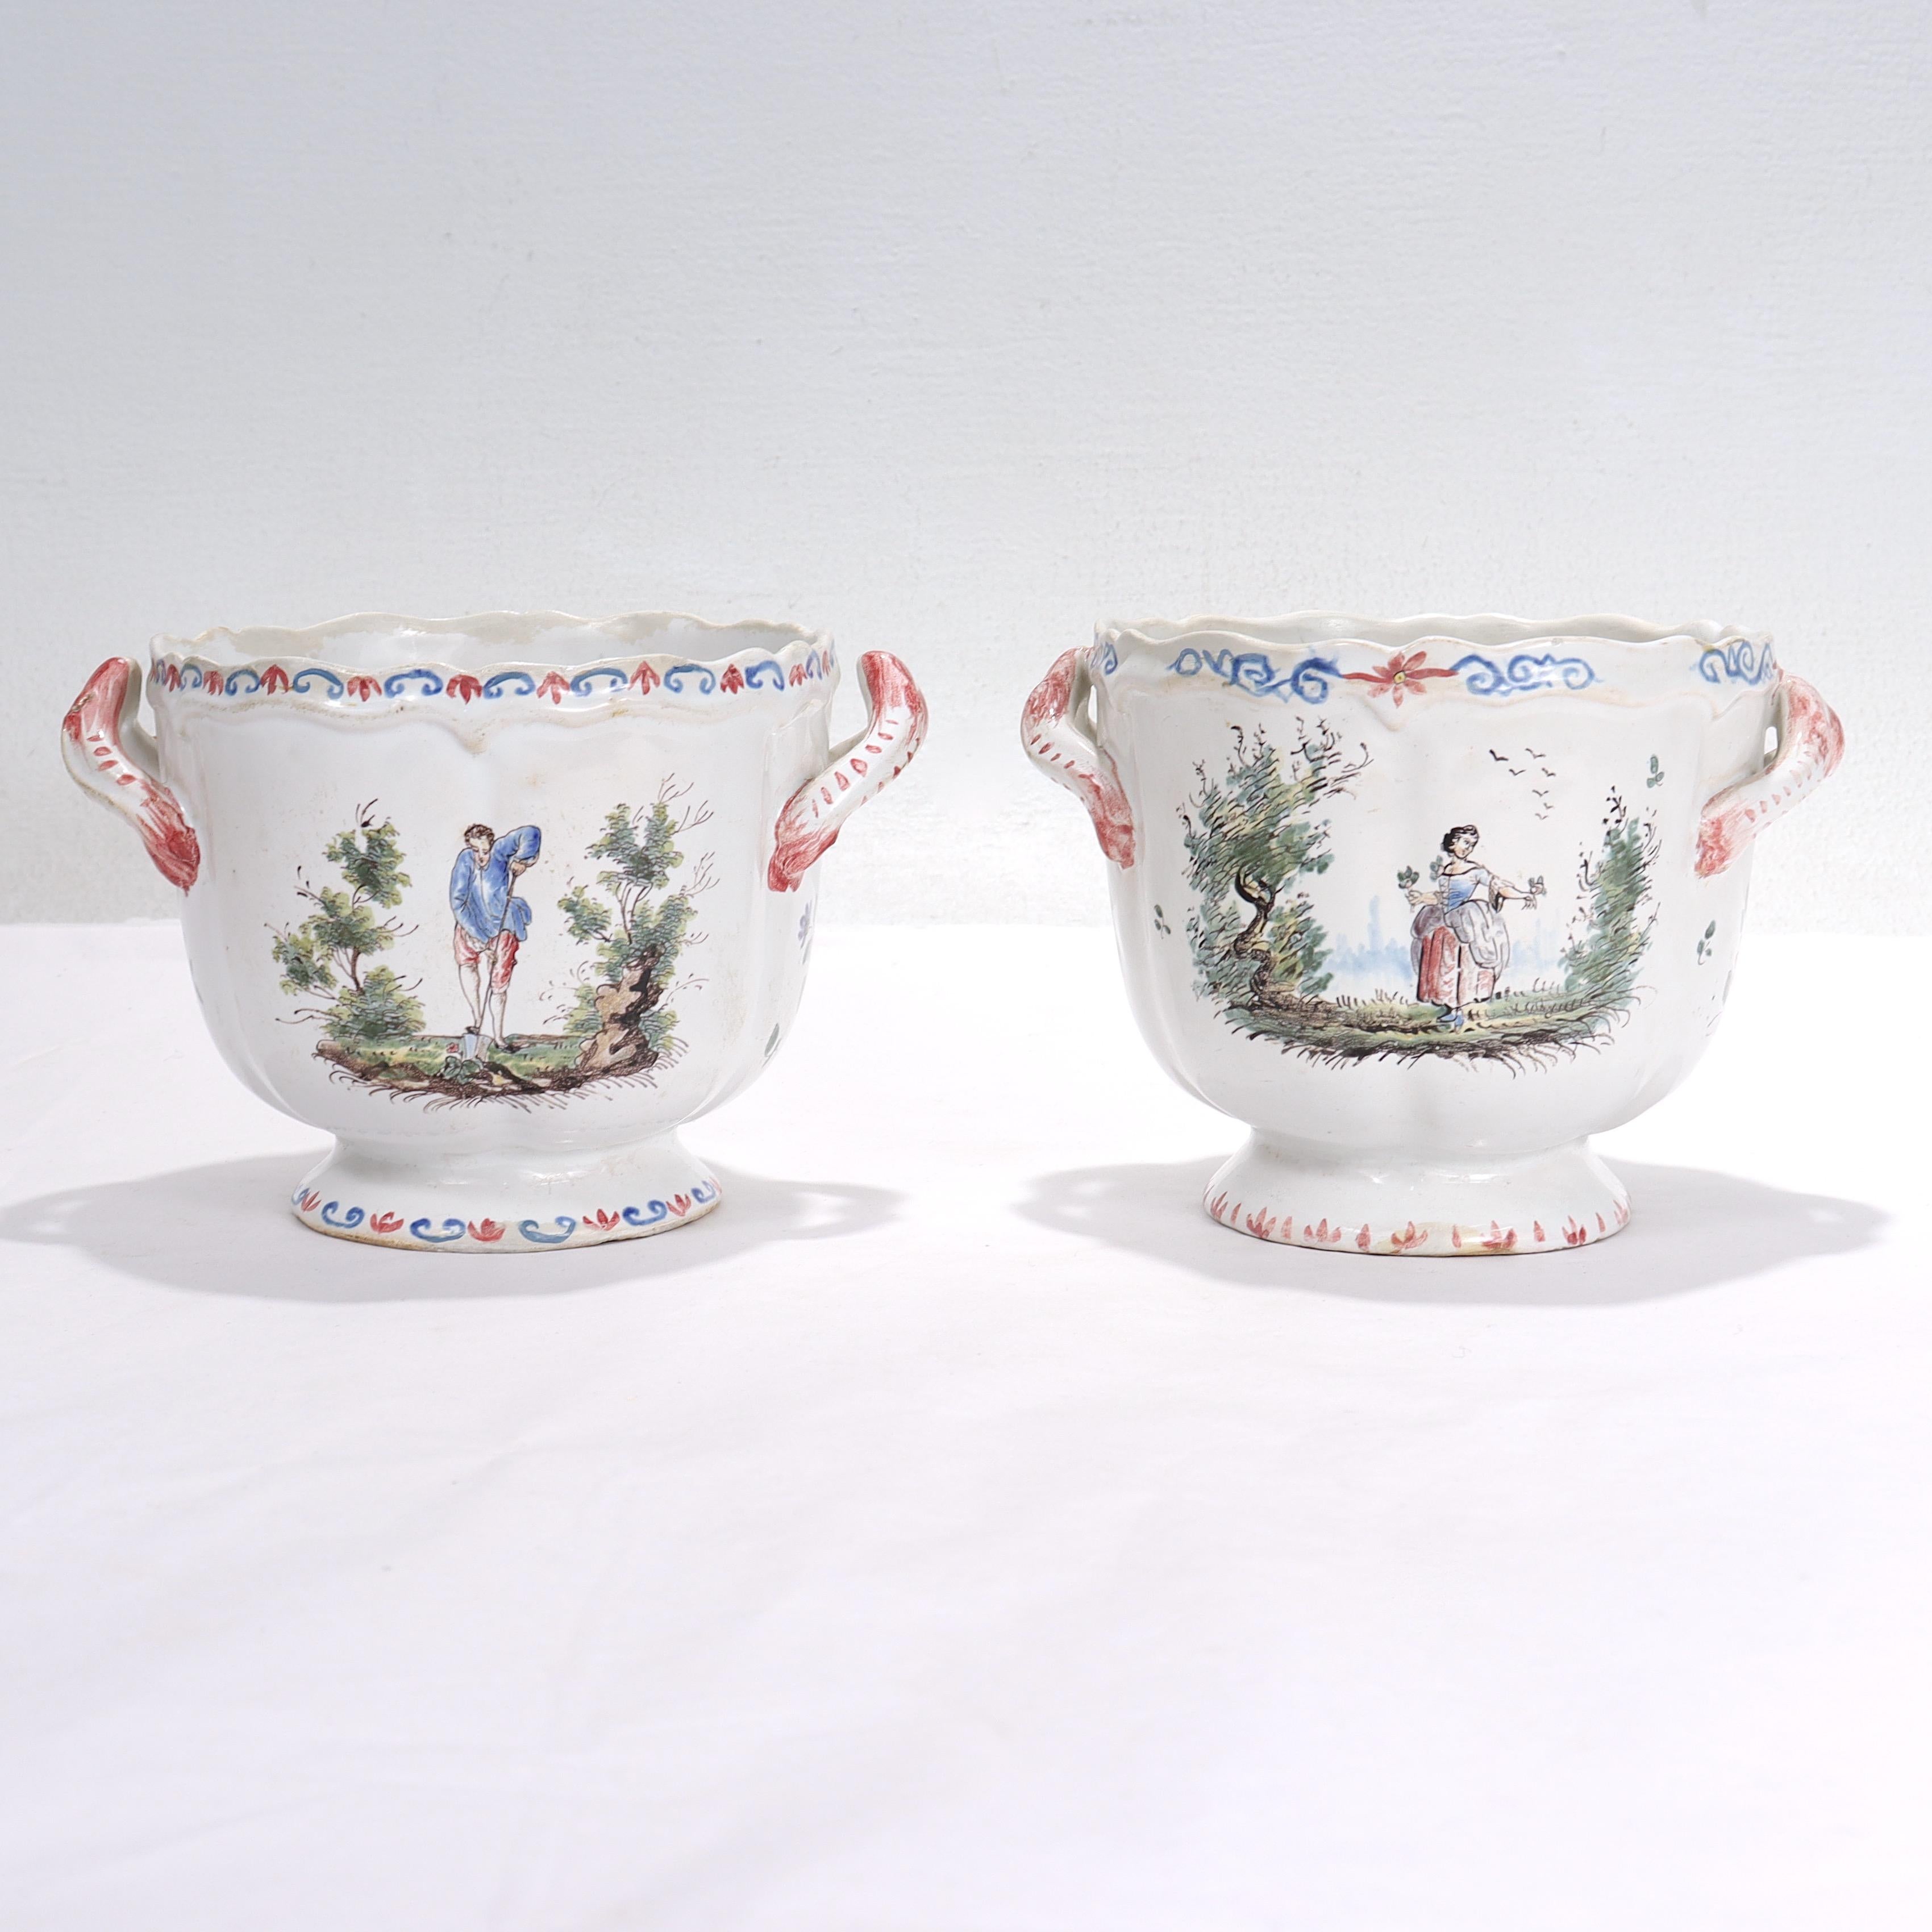 A fine pair of antique French faience jardinieres or cachepots.

By Aprey. 

Each with two painted scenes on either side. One has a man gardening and a woman carrying a breadbasket on her head, while the other has a woman holding flowers and a